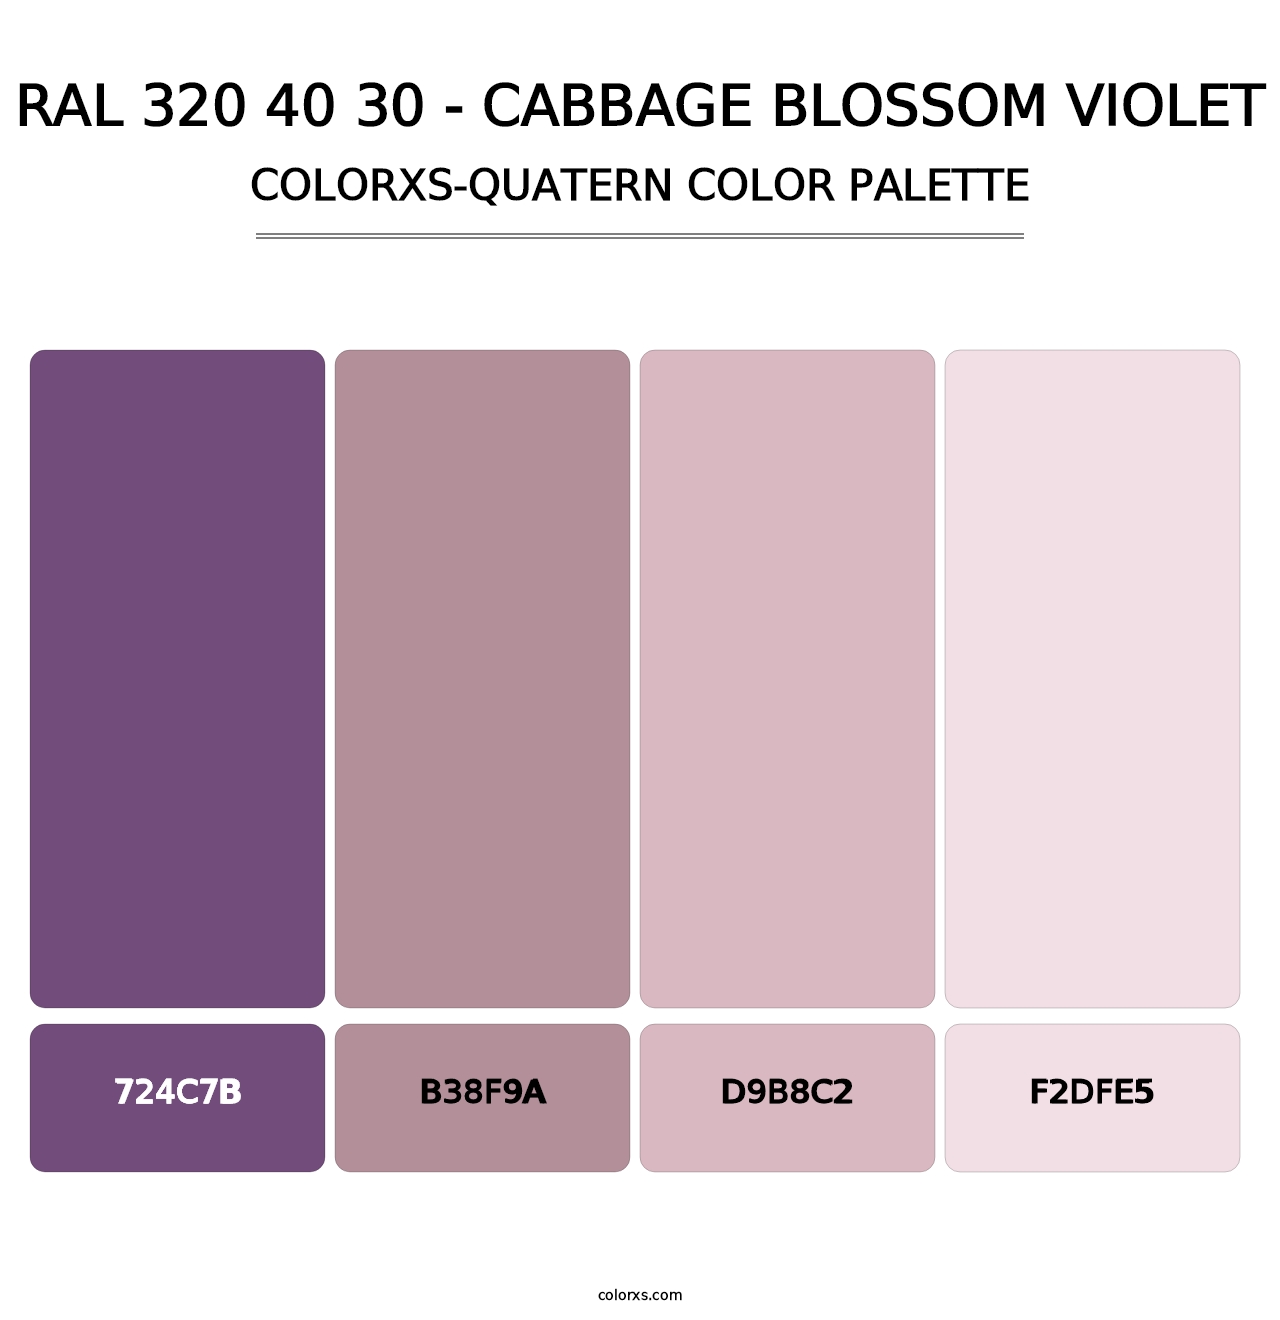 RAL 320 40 30 - Cabbage Blossom Violet - Colorxs Quatern Palette